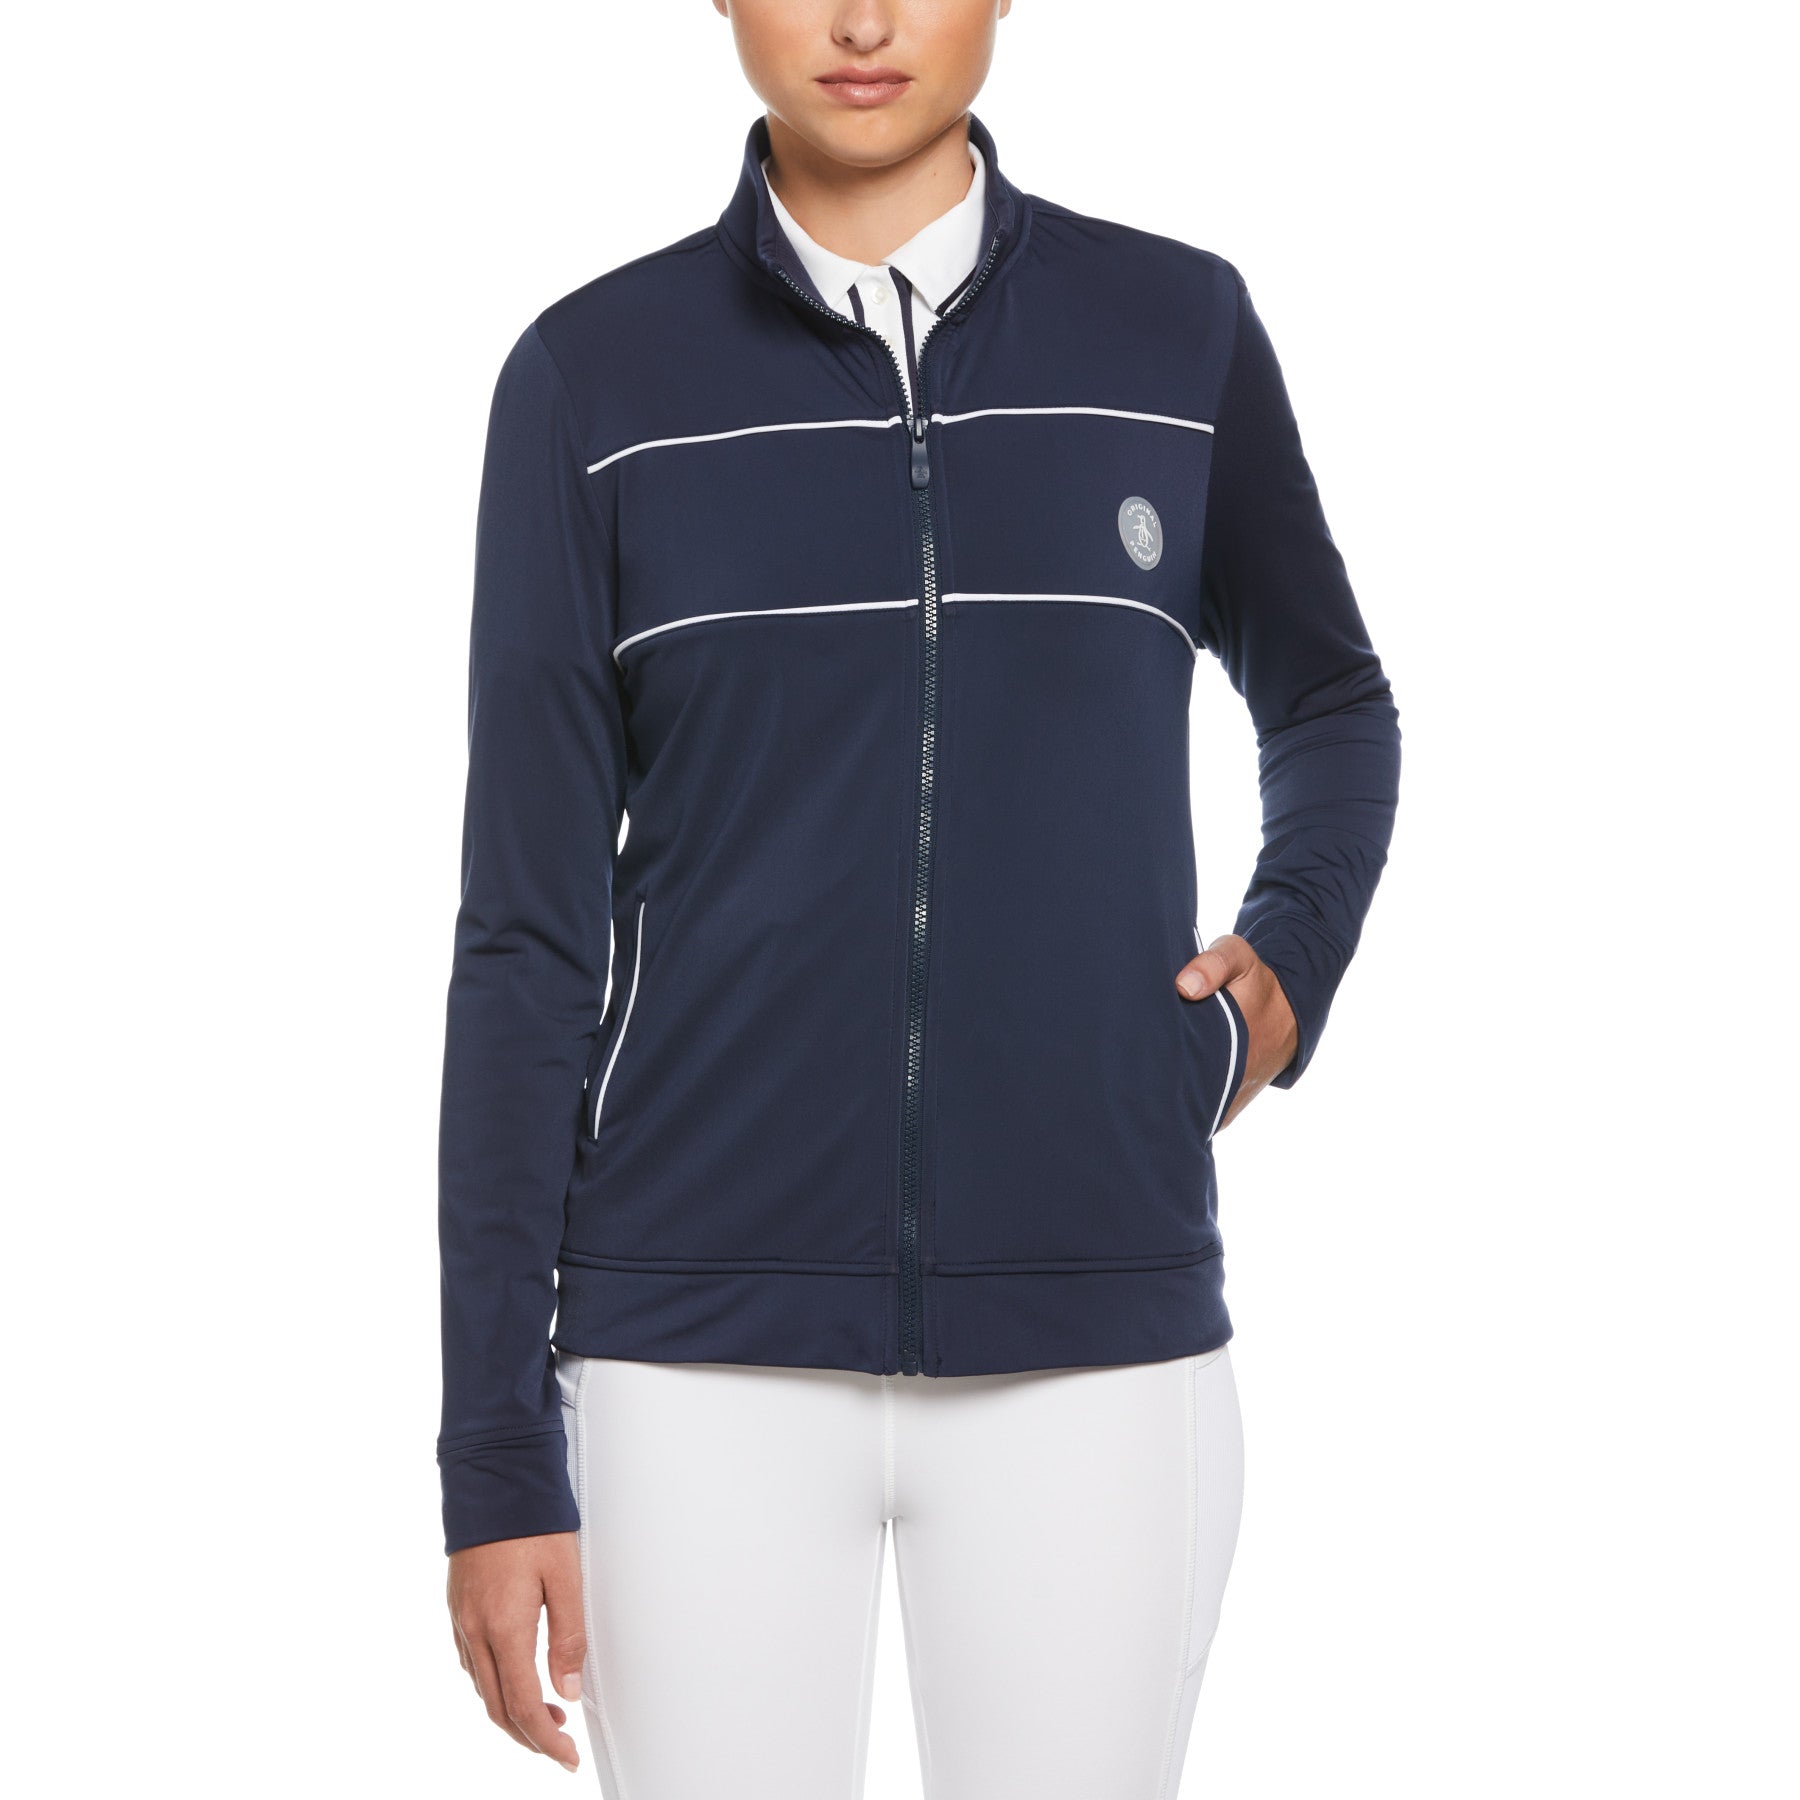 View Womens Performance Track Style Tennis Jacket In Black Iris information